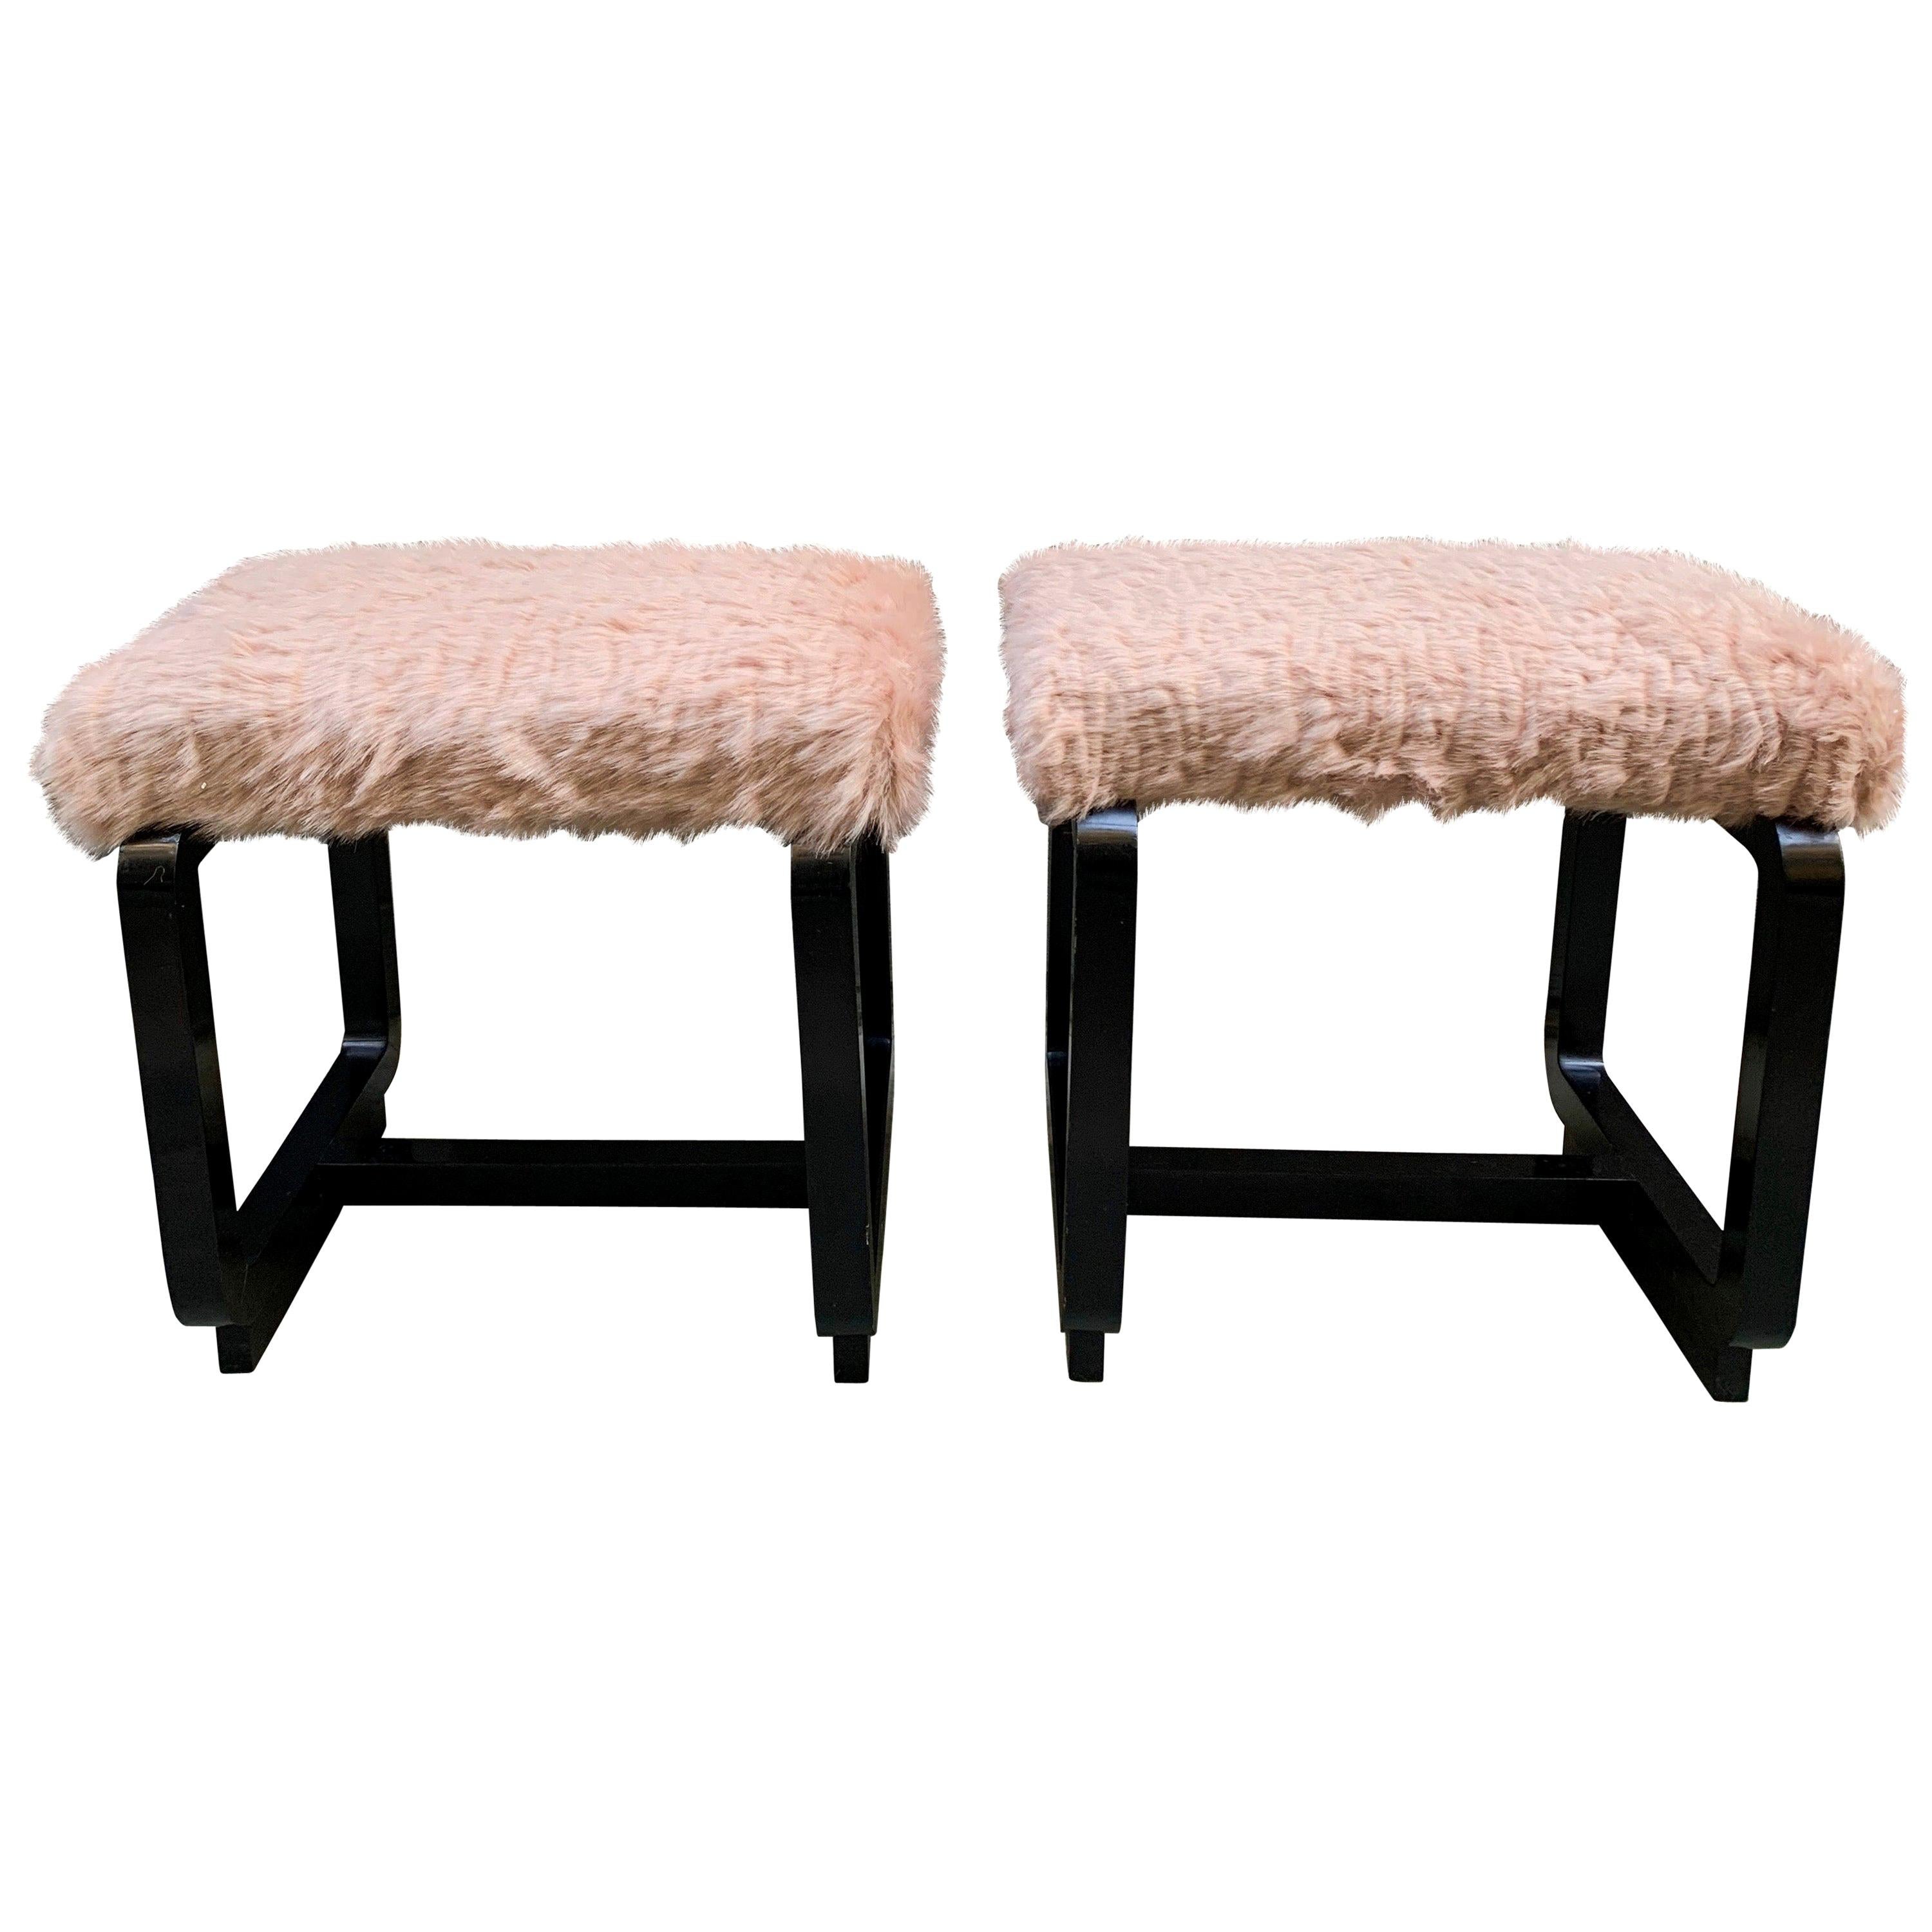 Pair of Deco Benches in Black Lacquered Wood and Pale Pink Eco Fur Seats, 1930